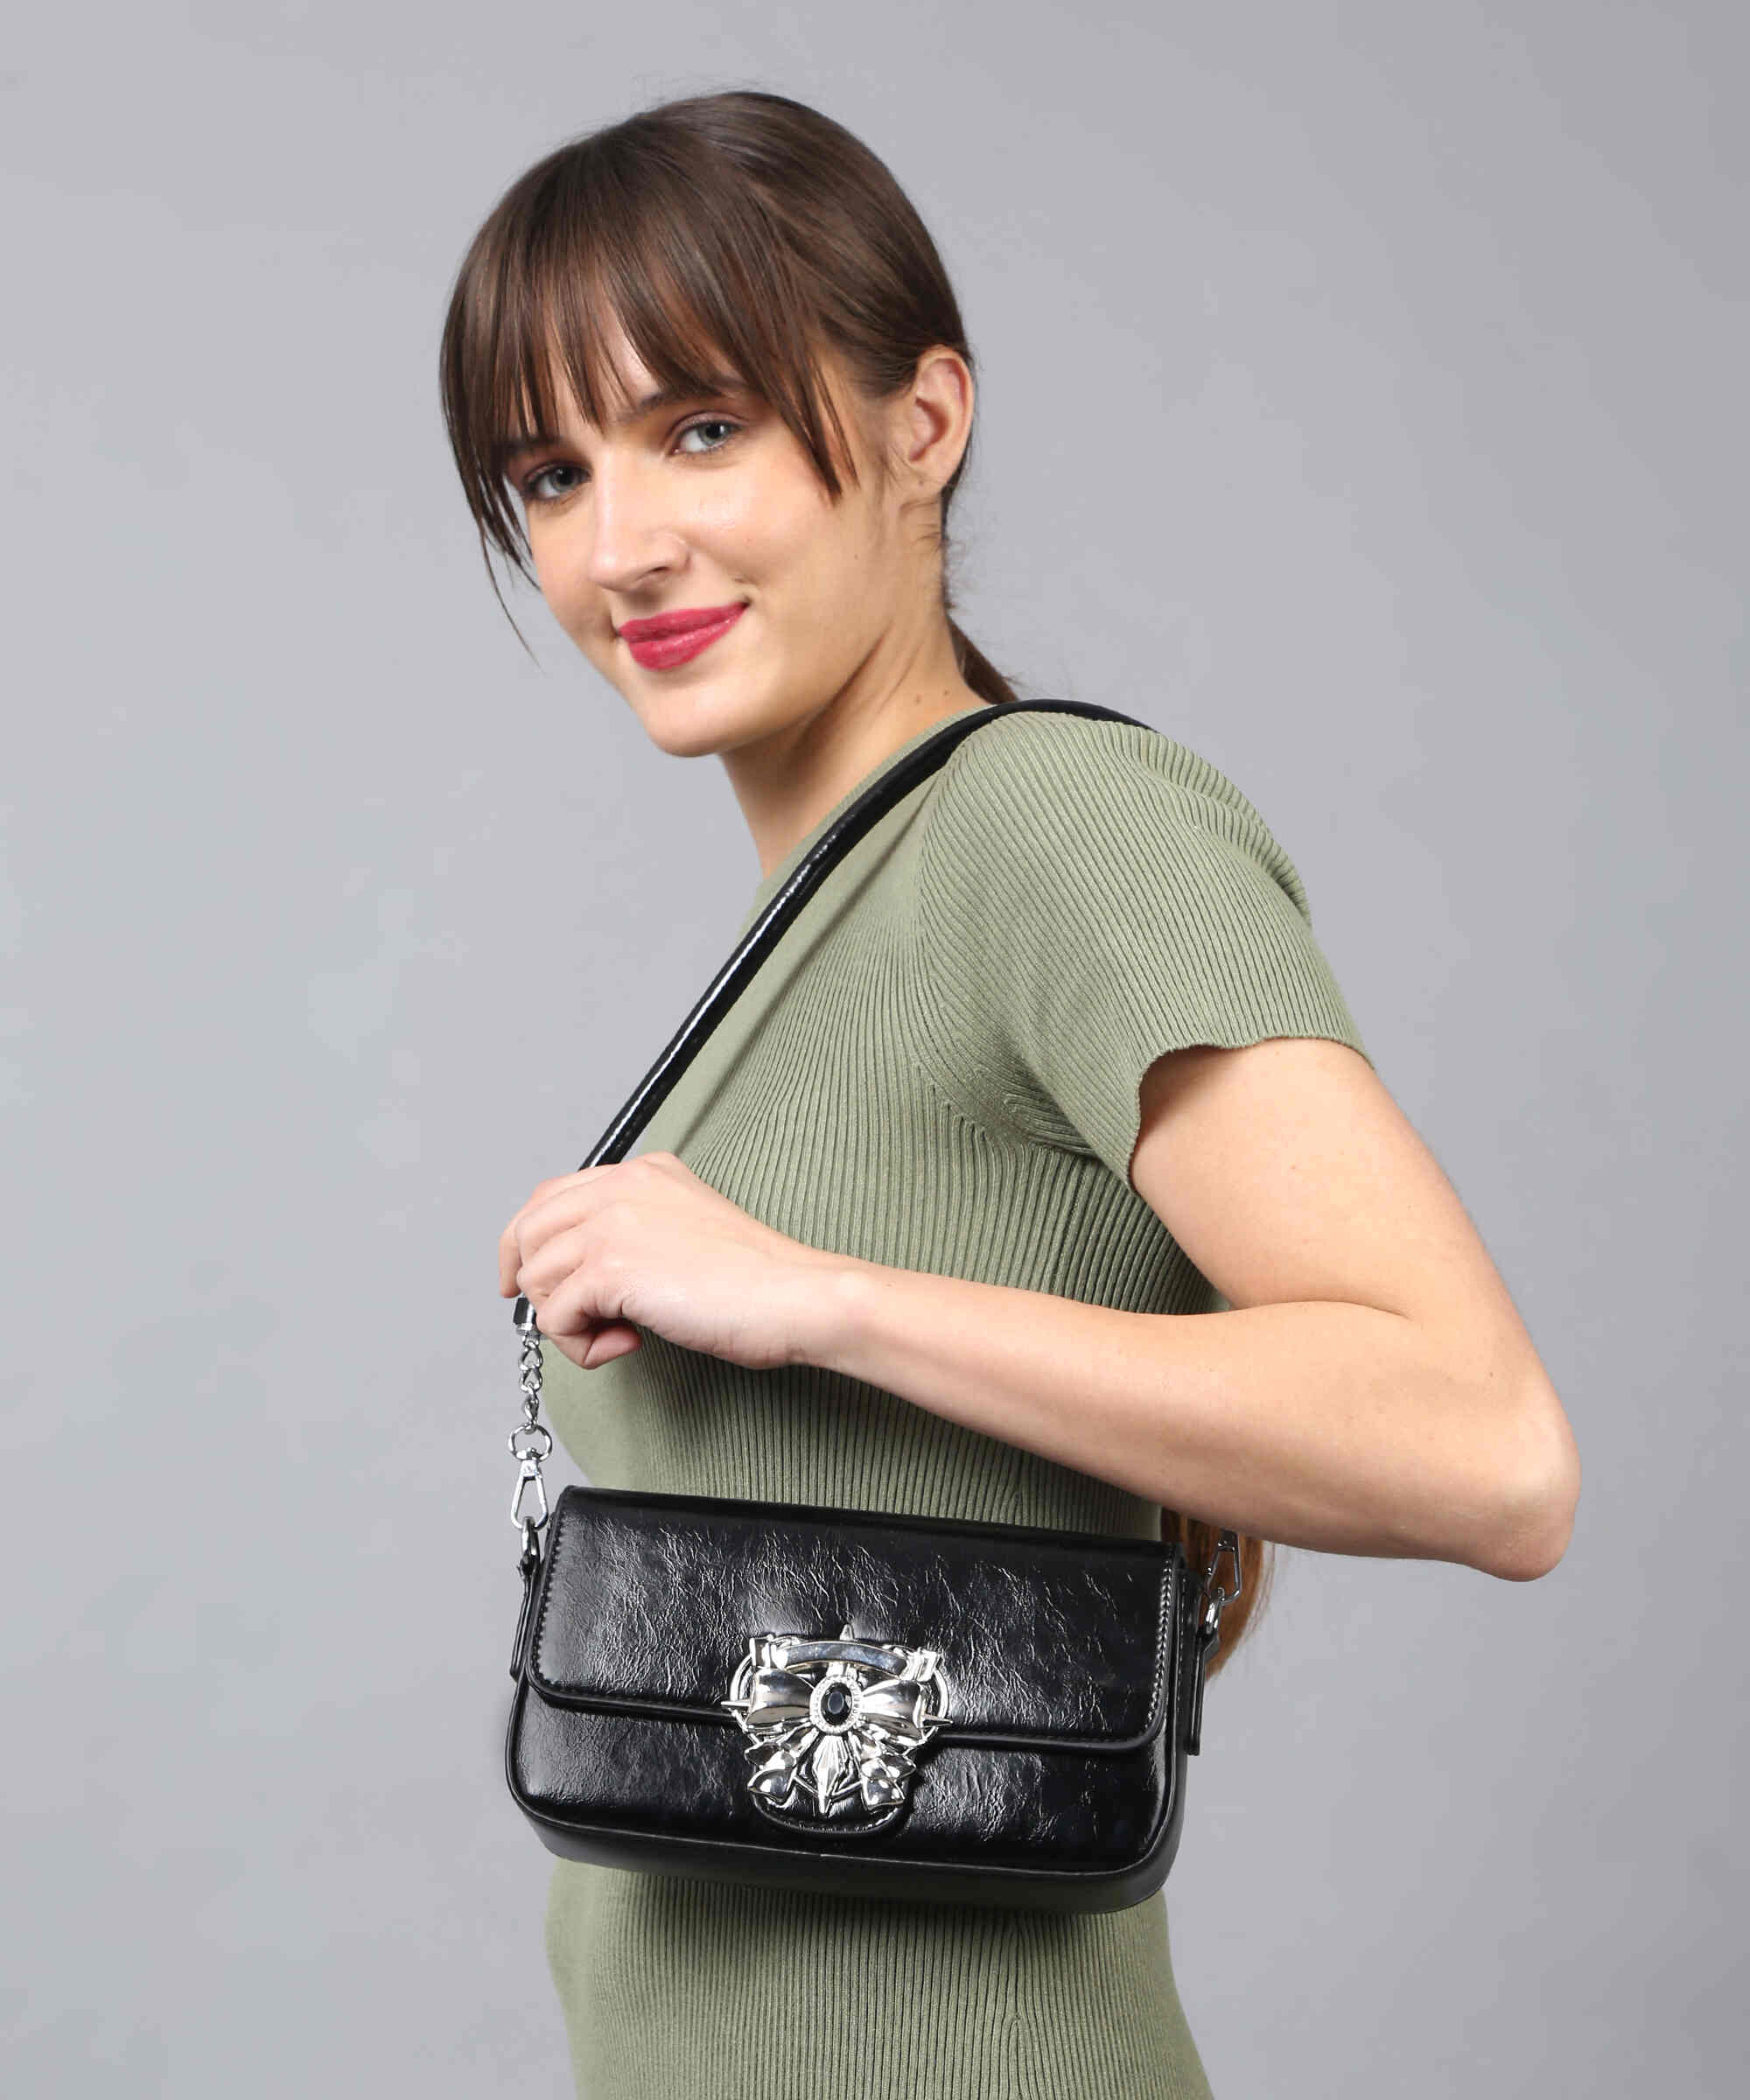 Filauri Butterfly Textured Sling Bag